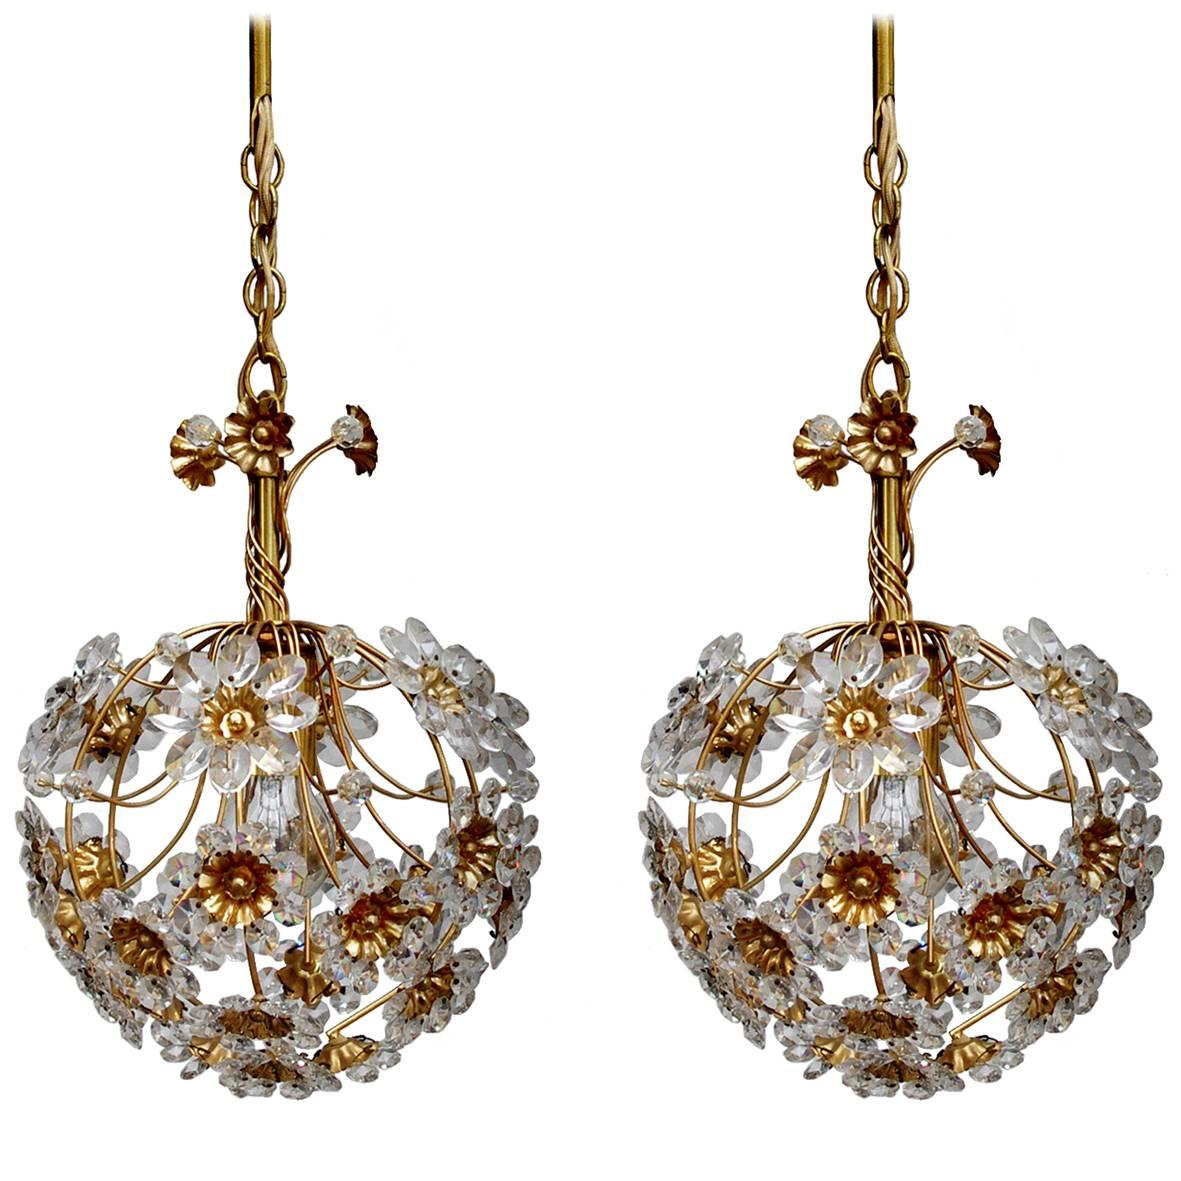 Pair of German Vintage Crystal Glass and Gold Brass Chandeliers Pendants, 1960s